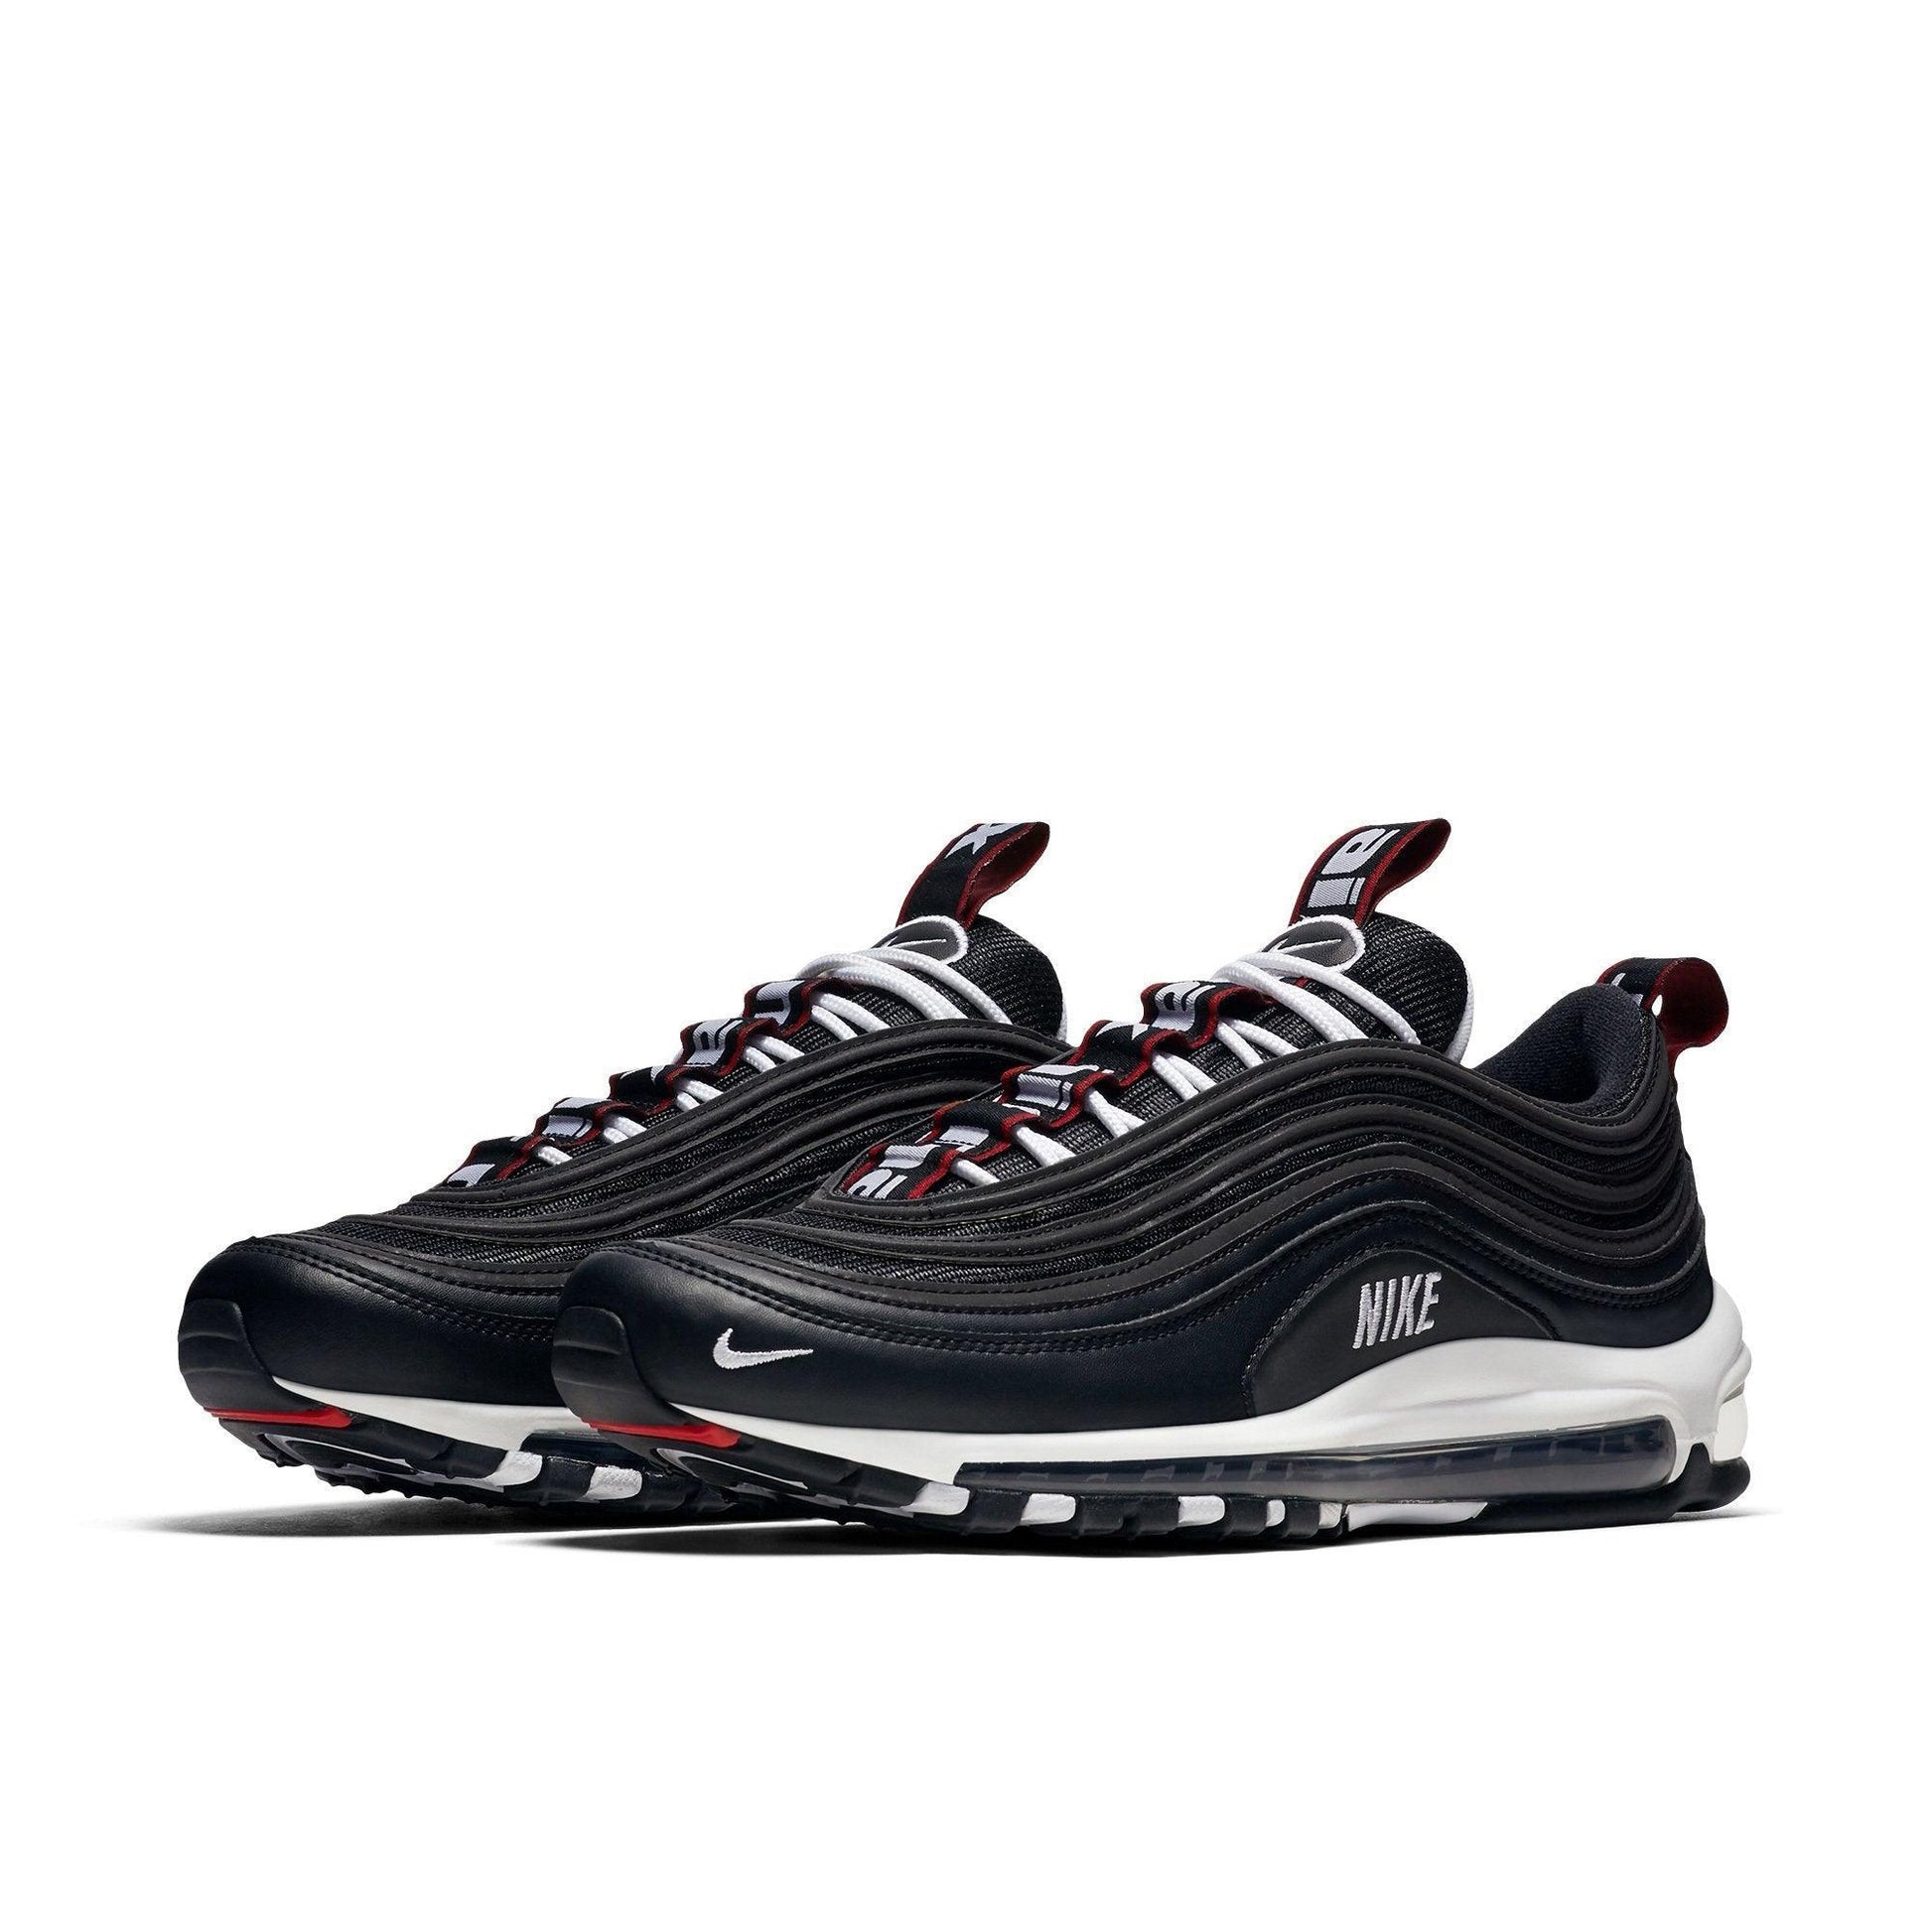 NIKE AIR MAX 97 PREMIUM Men Running Shoes Comfortable Breathable Shock Absorption Sneakers #312834-008 - CADEAUME